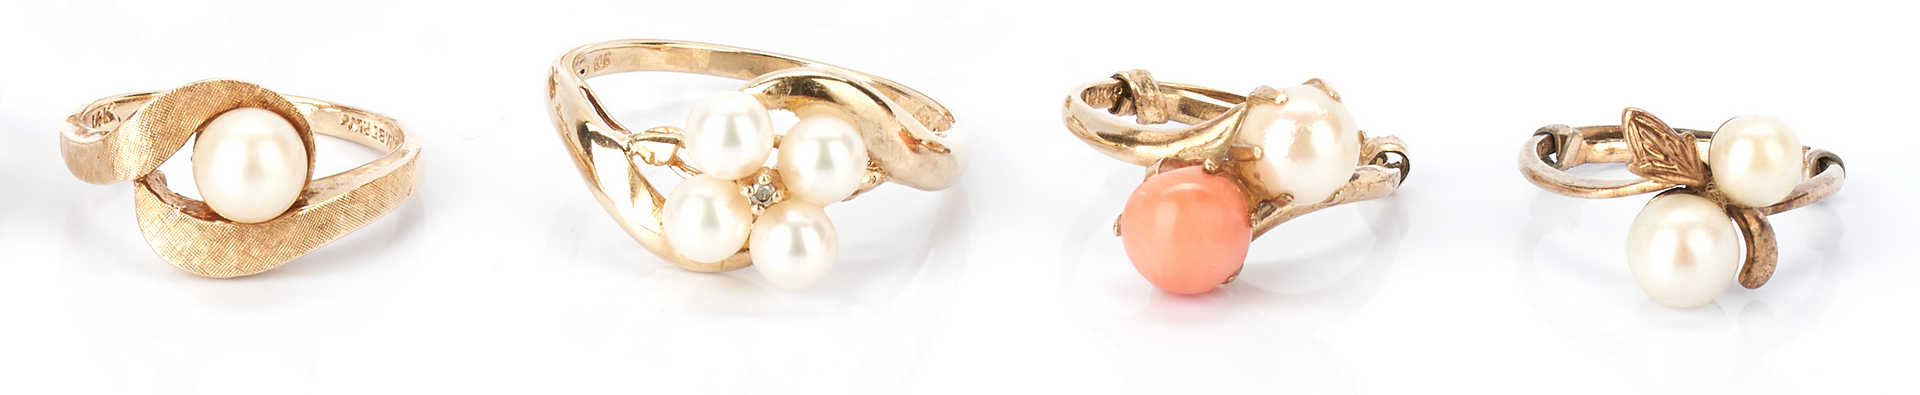 Lot 429: 8 Ladies Rings and 2 Earring Sets, Gold and Pearls